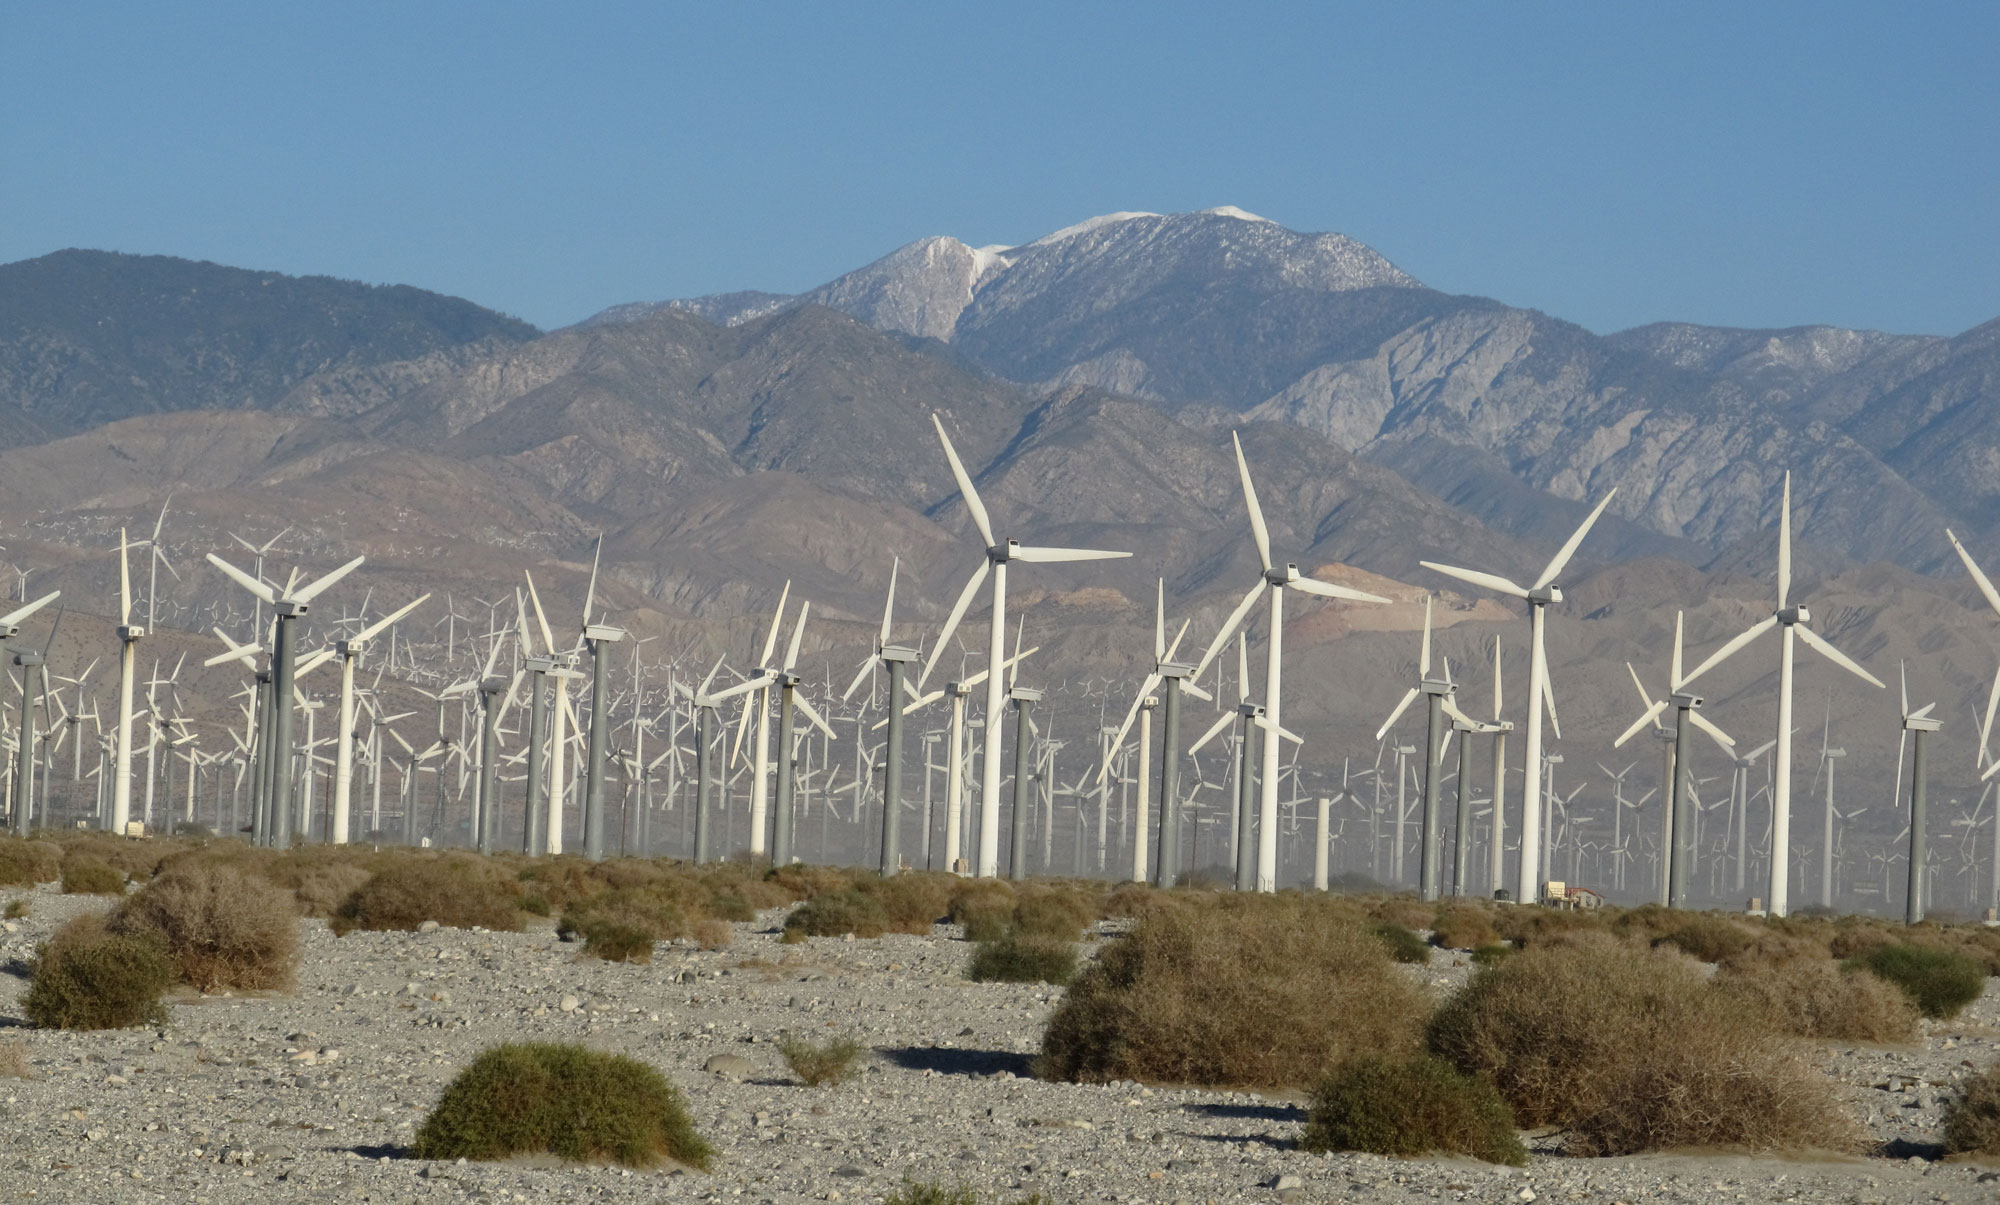 Photograph of San Gorgonio Pass wind farm. The photograph shows numerous white wind turbines in a dry landscape. A mountain rises in the background, behind the turbines.